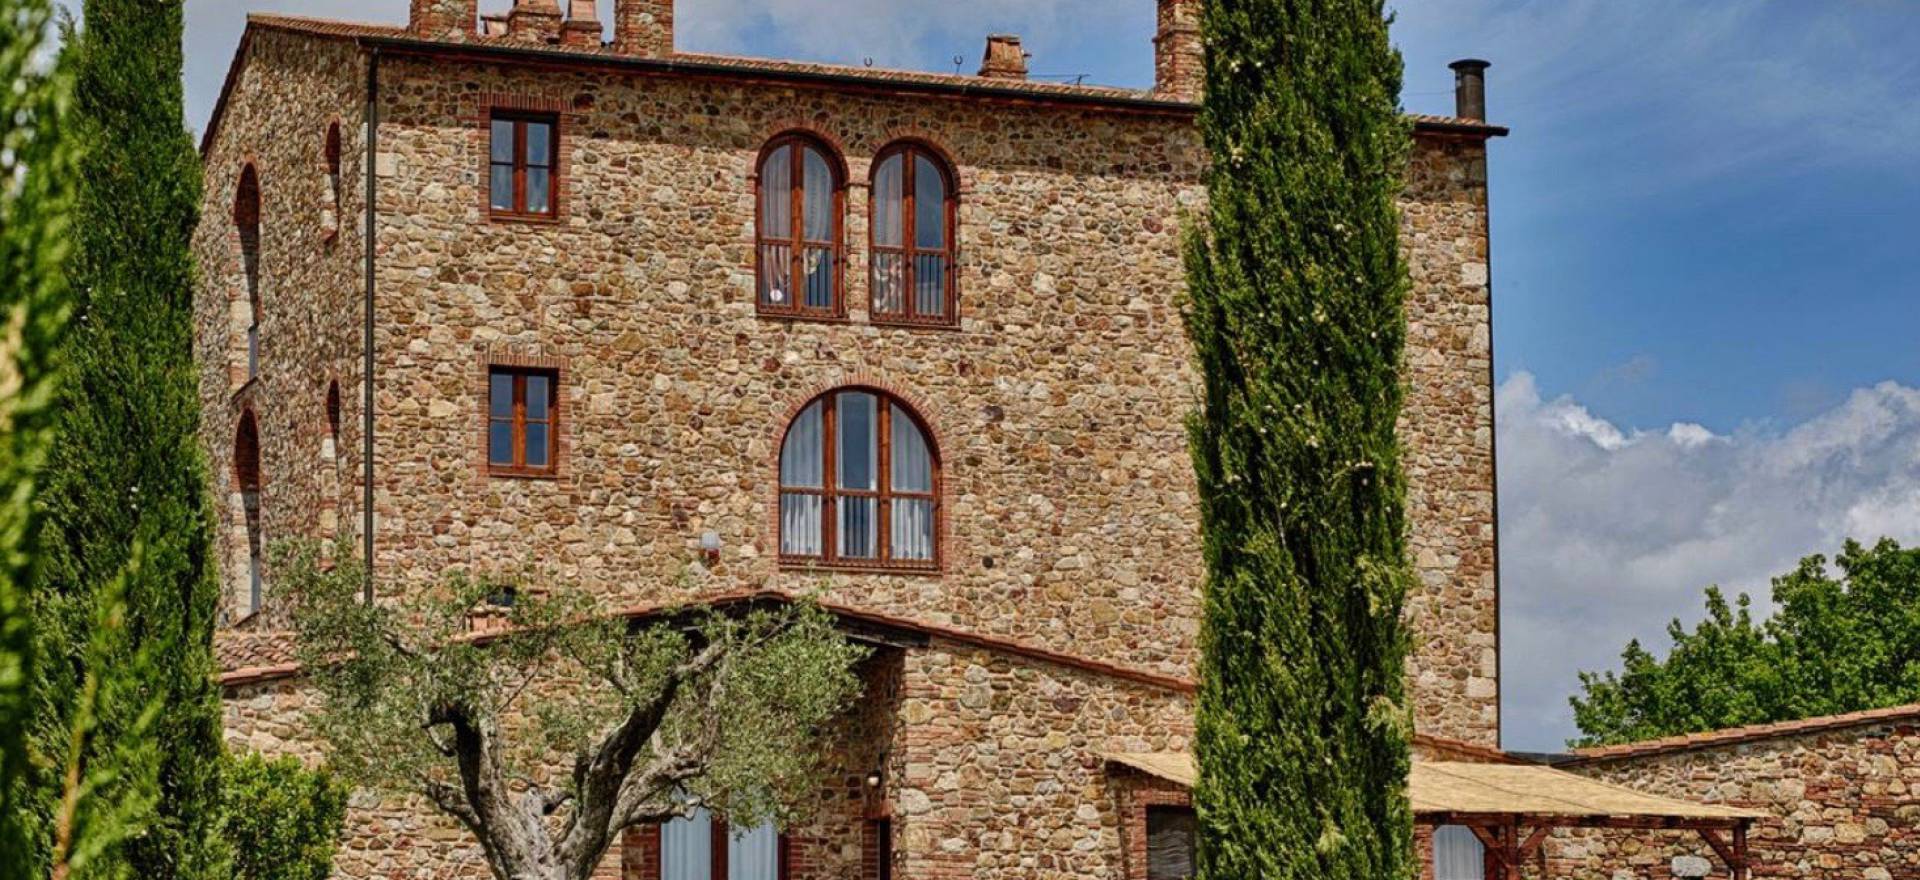 Agriturismo Tuscany Agriturismo in a quiet and rural location in Tuscany